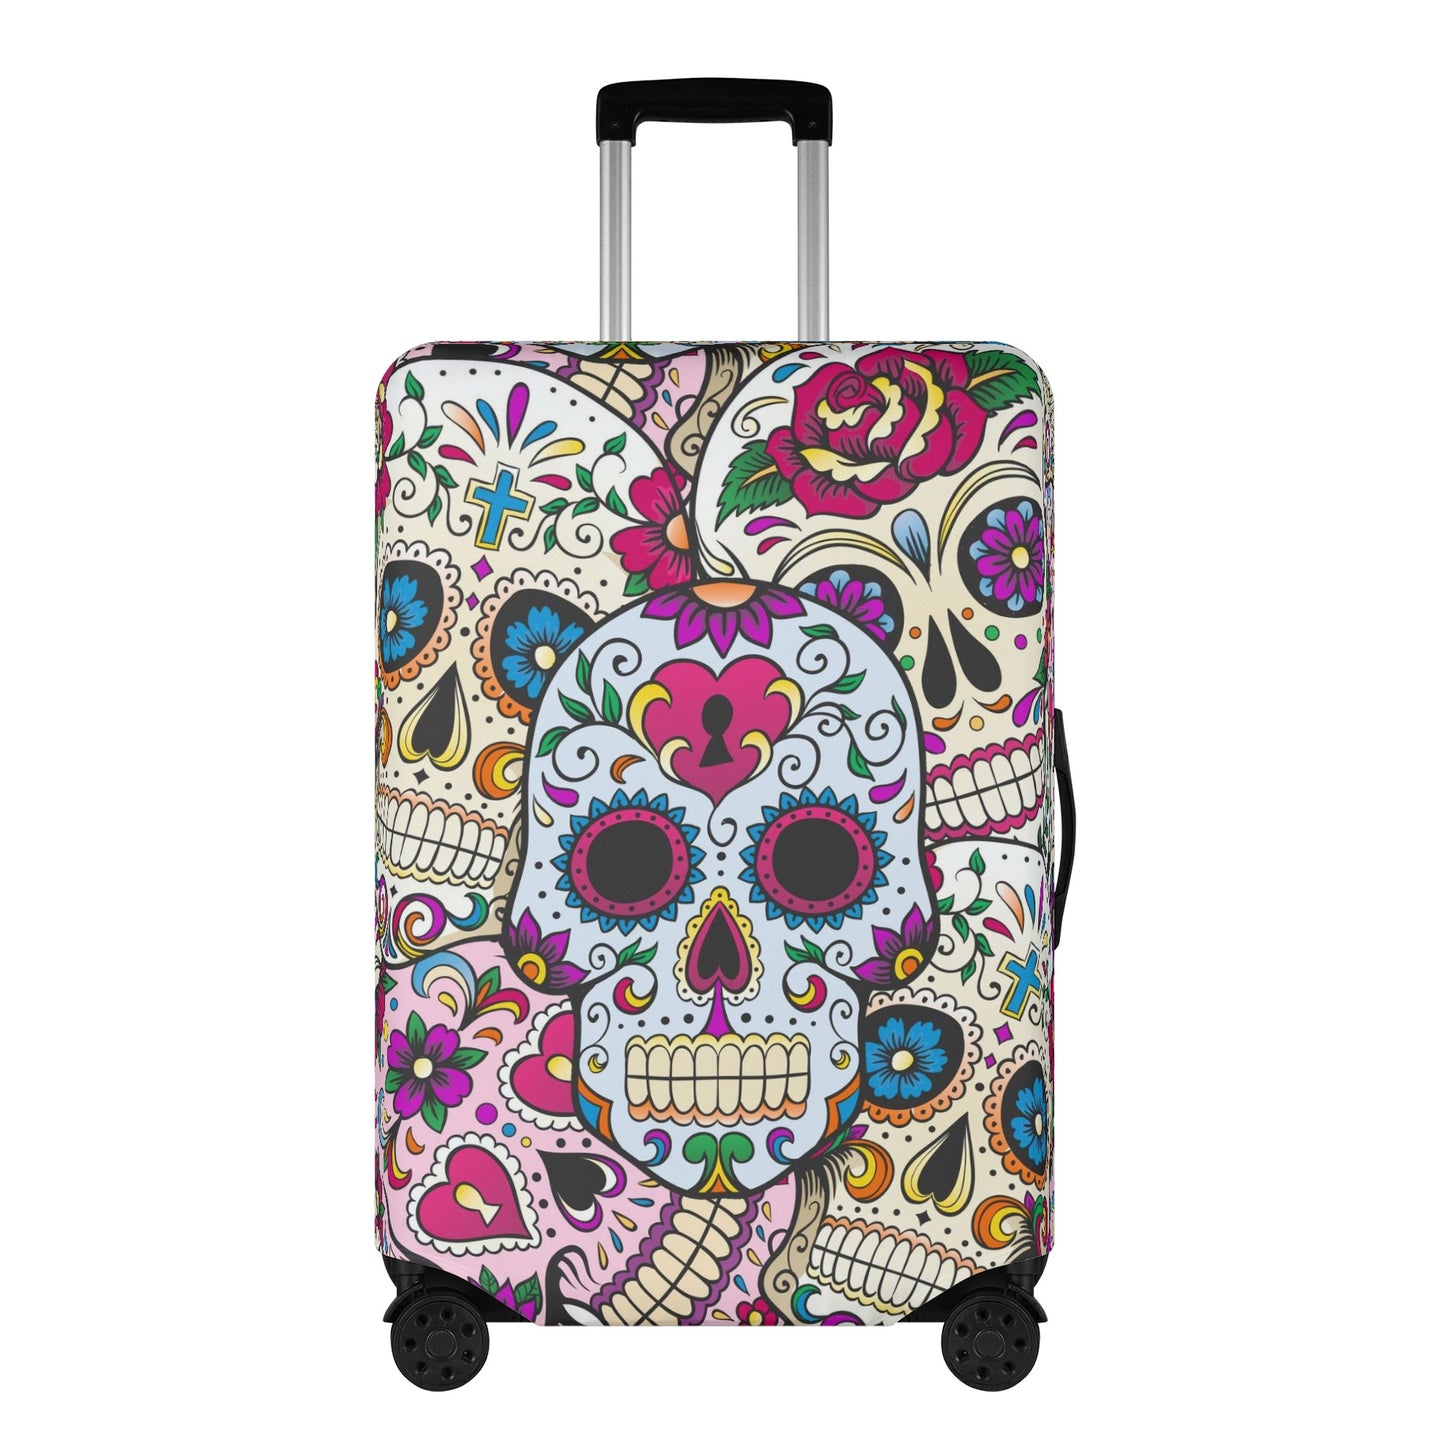 Sugar skull pattern day of the dead Polyester Luggage Cover